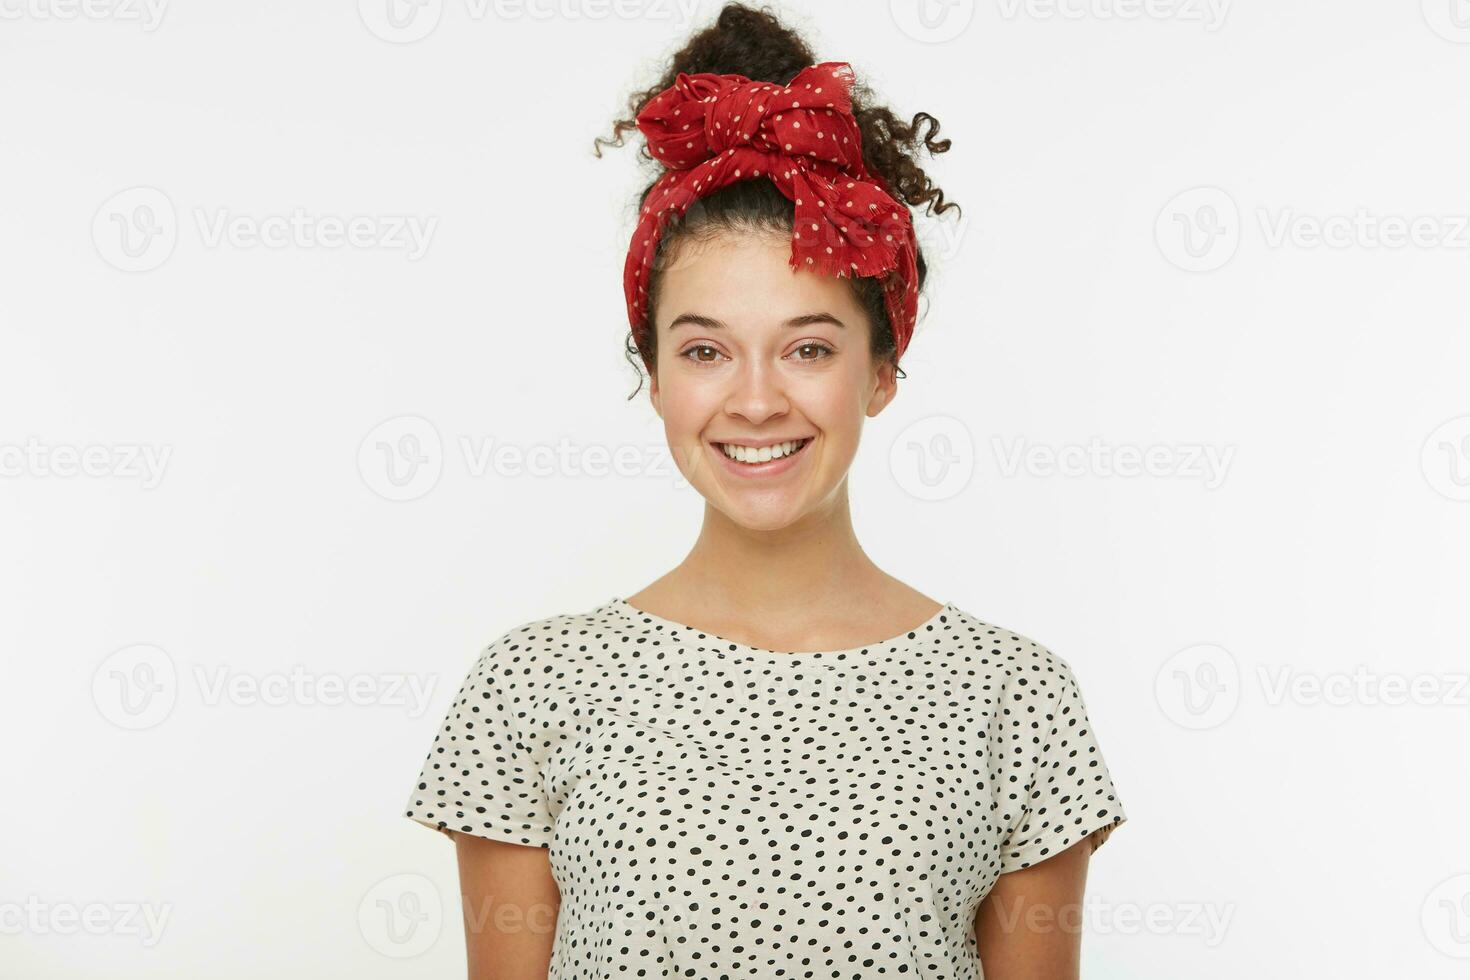 Pretty lovely girl with brown curly hair gathered in a bun pleasantly smiles, dressed in a white T-shirt with black polka dots, on her head a red scarf with white polka dots, over white background photo